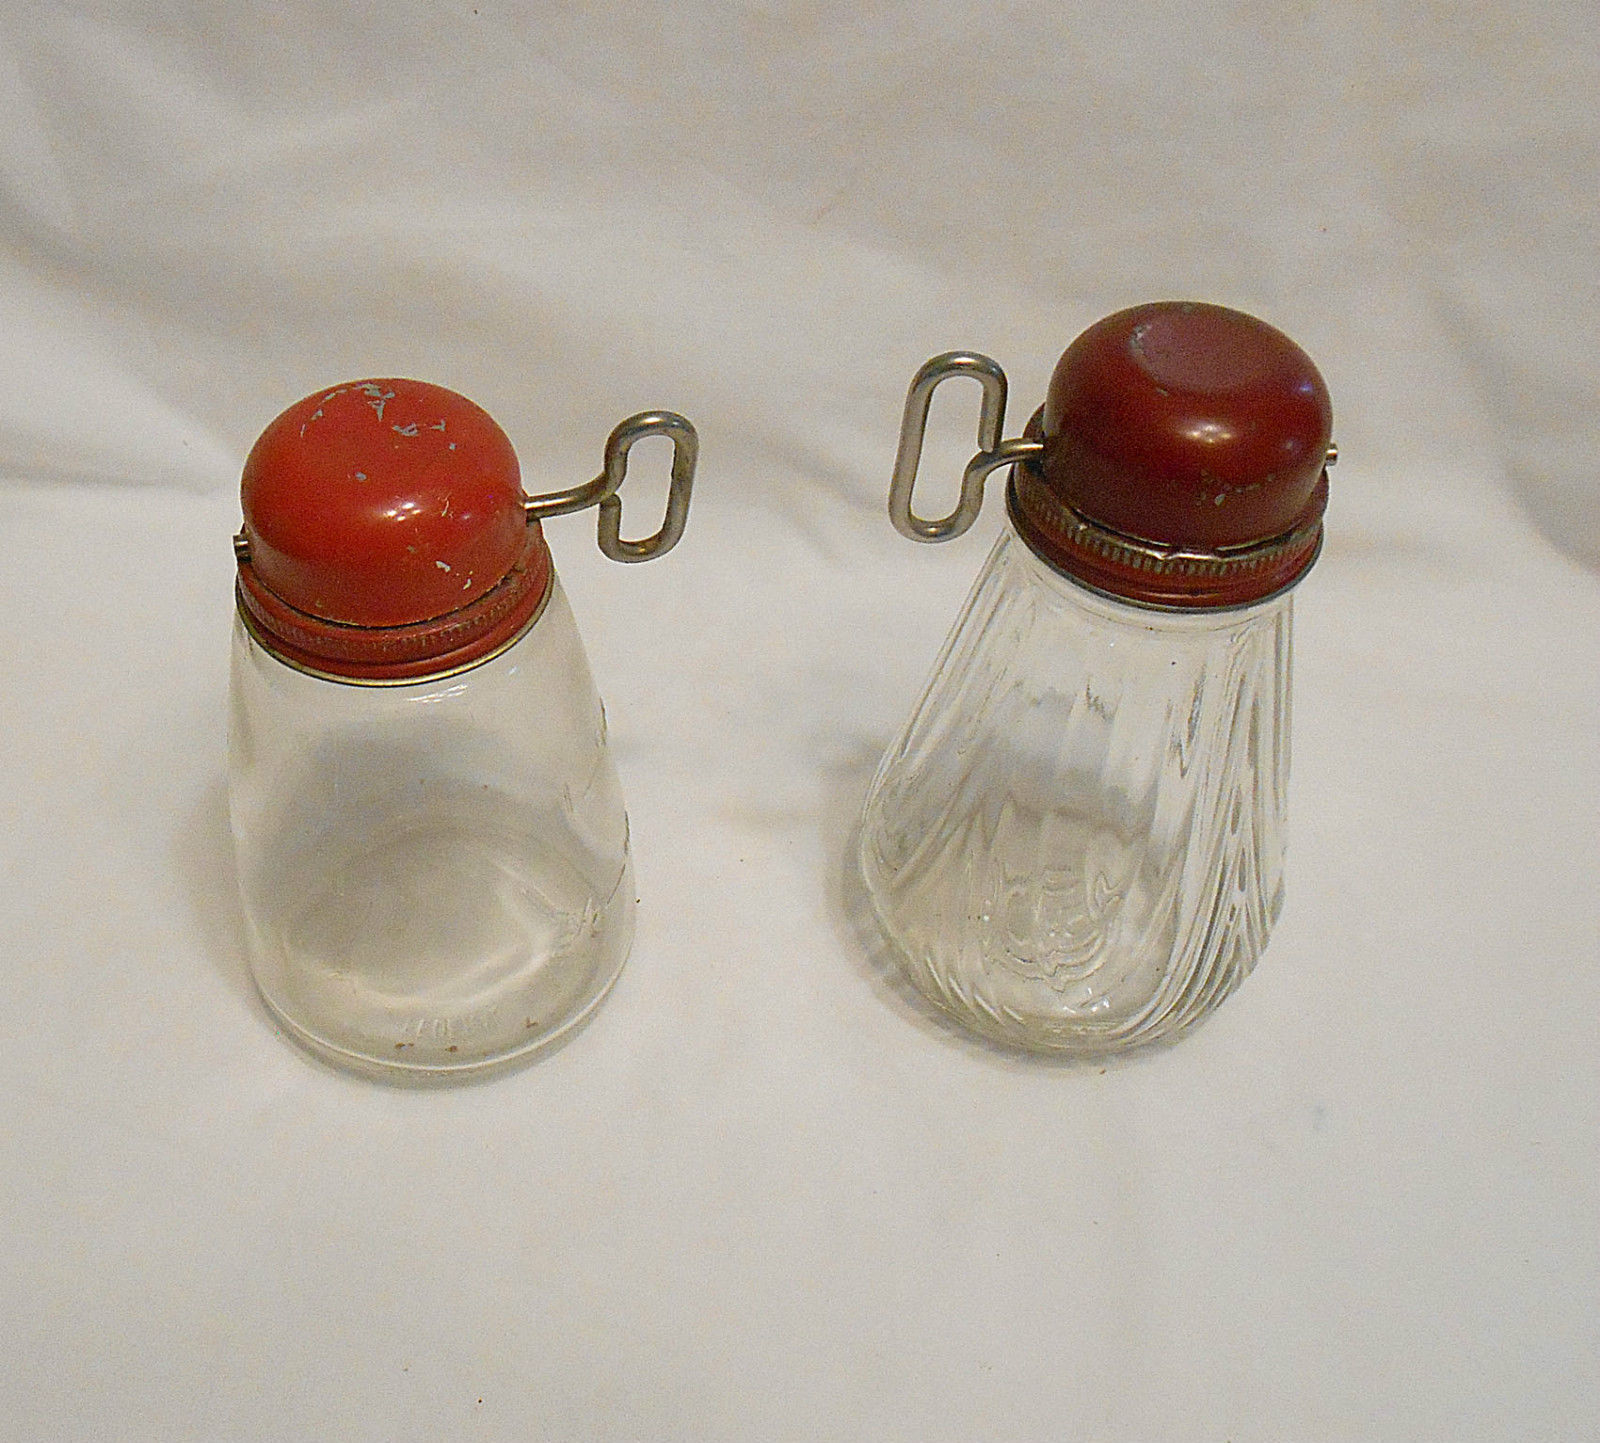 Vintage Manual Hand Crank Nut Meat Chopper Red Metal with Glass